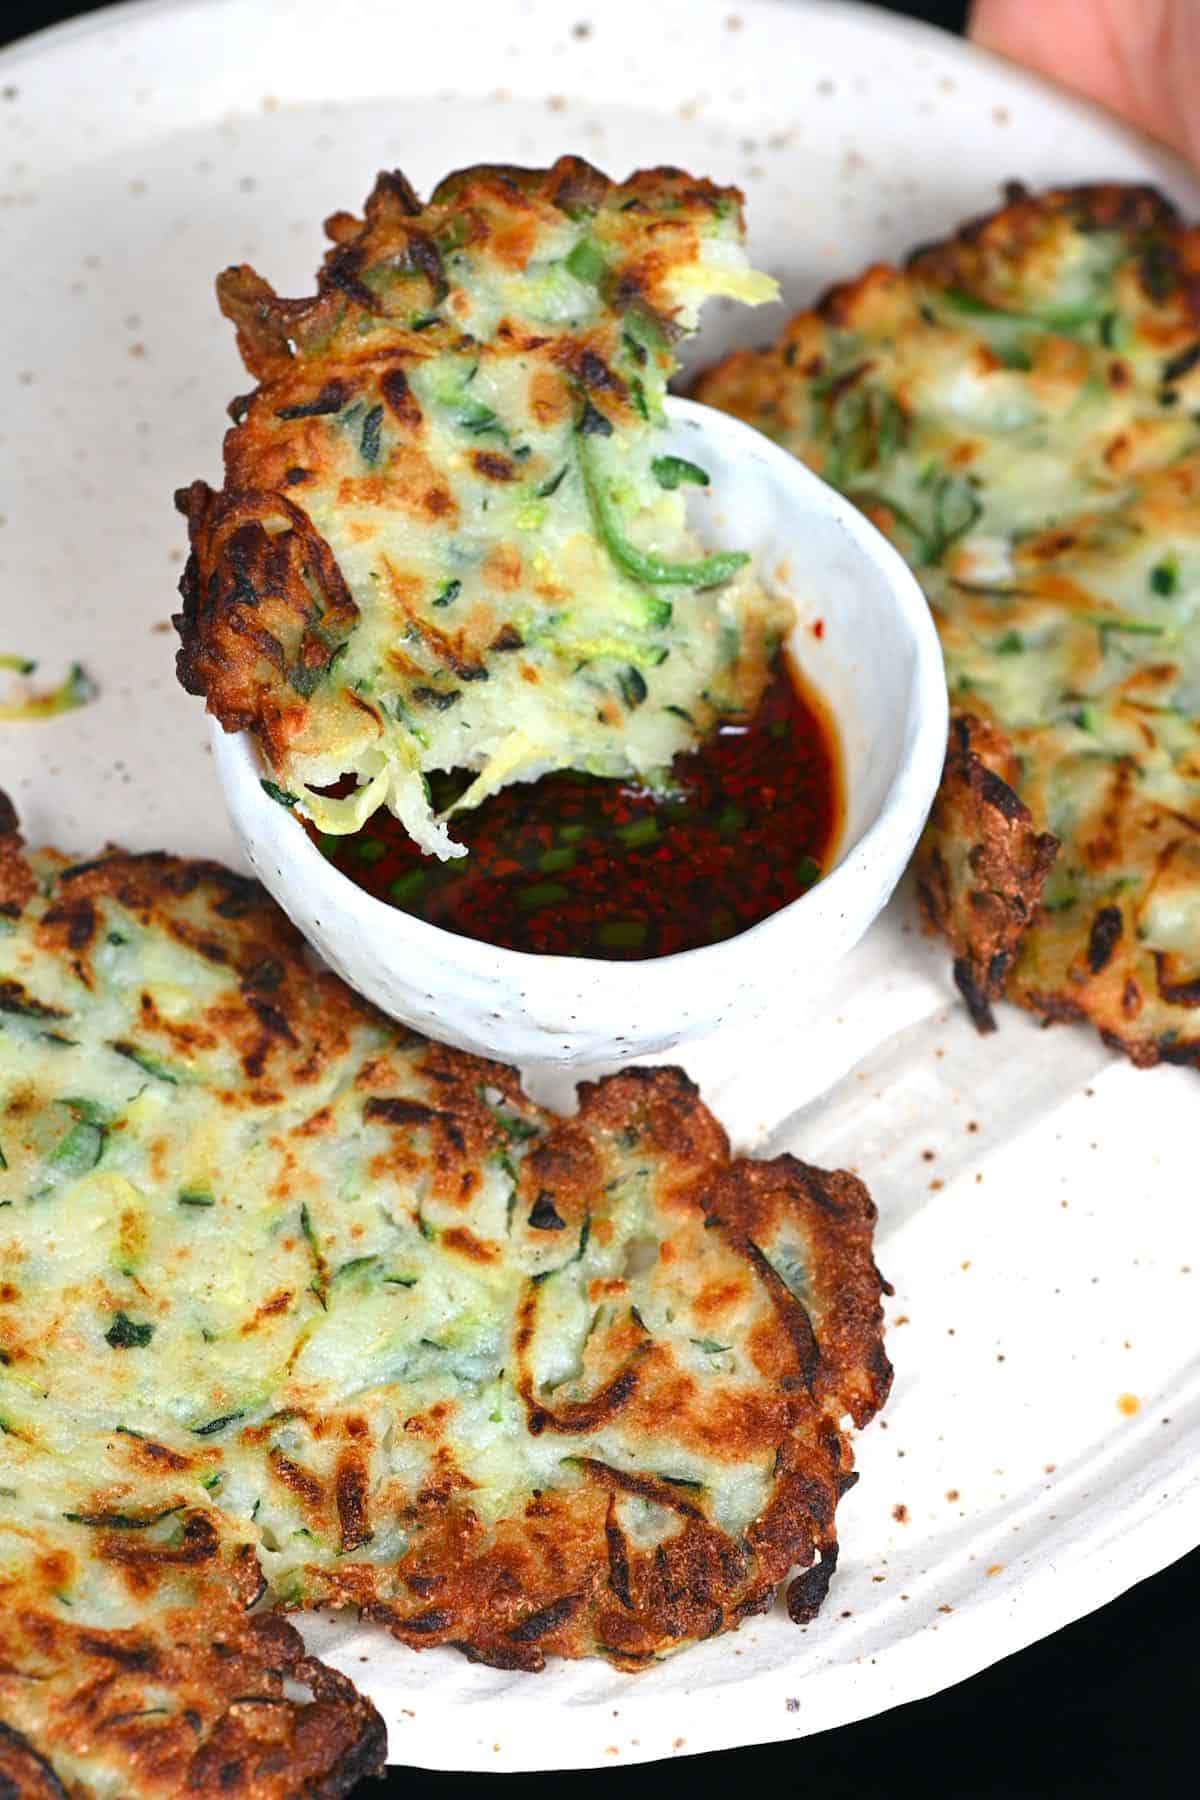 Zucchini fritters dipped in sauce